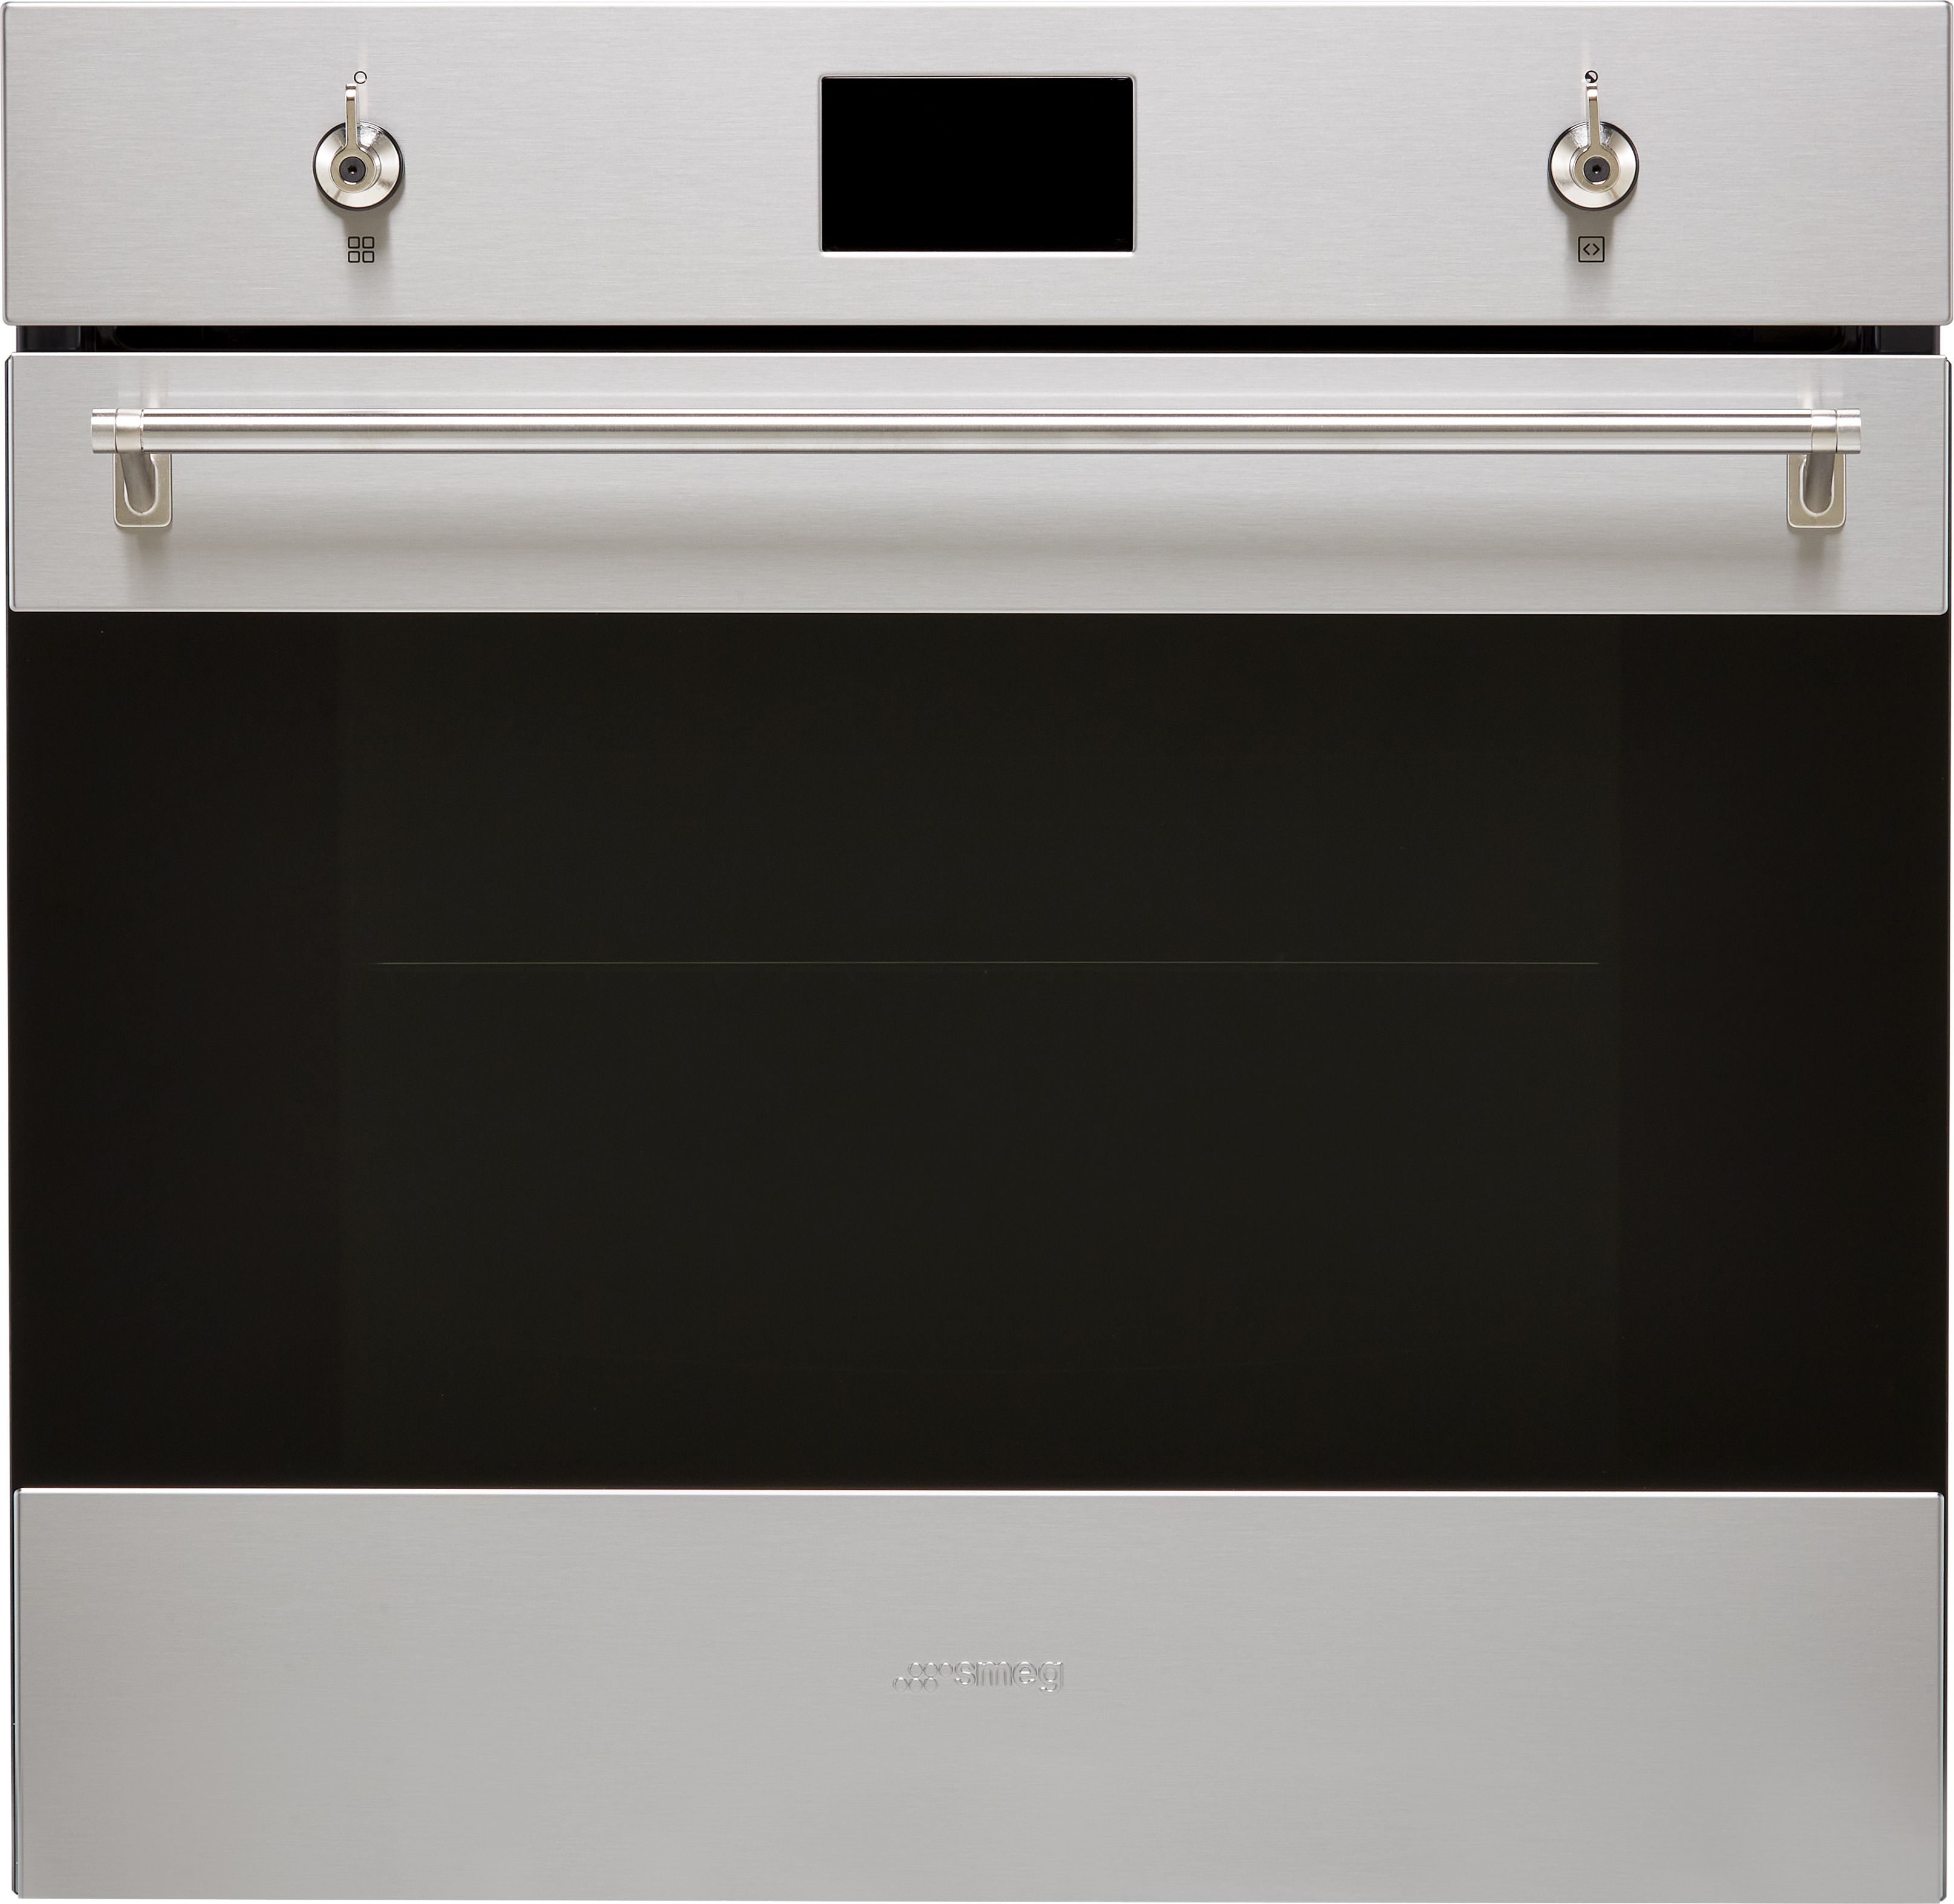 Smeg Classic SOP6302TX Built In Electric Single Oven with Pyrolytic Cleaning - Stainless Steel - A+ Rated, Stainless Steel